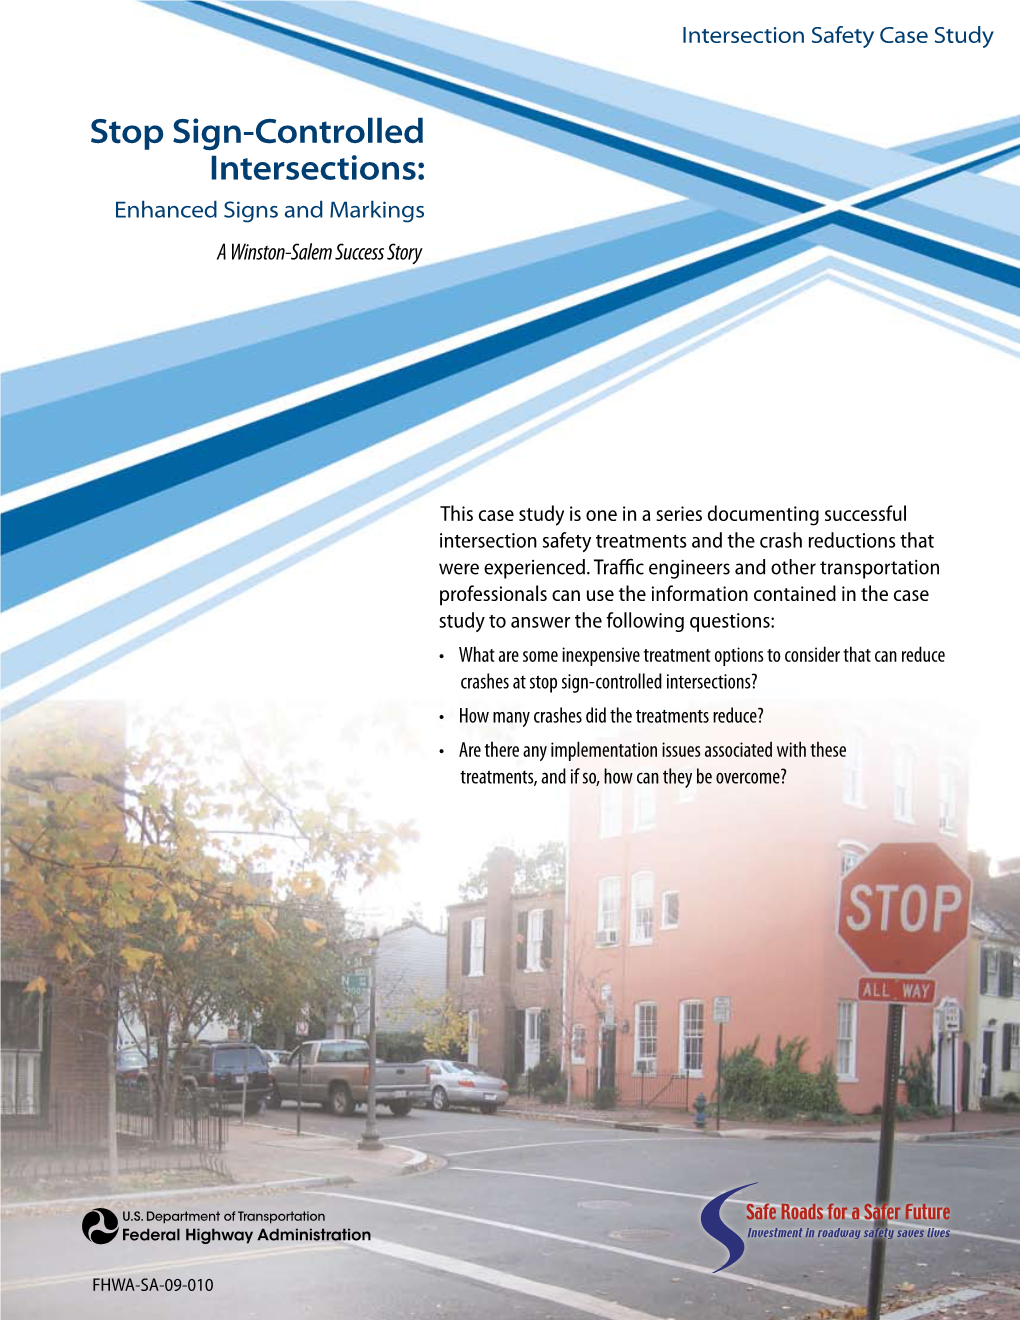 Stop Sign-Controlled Intersections: Enhanced Signs and Markings a Winston-Salem Success Story